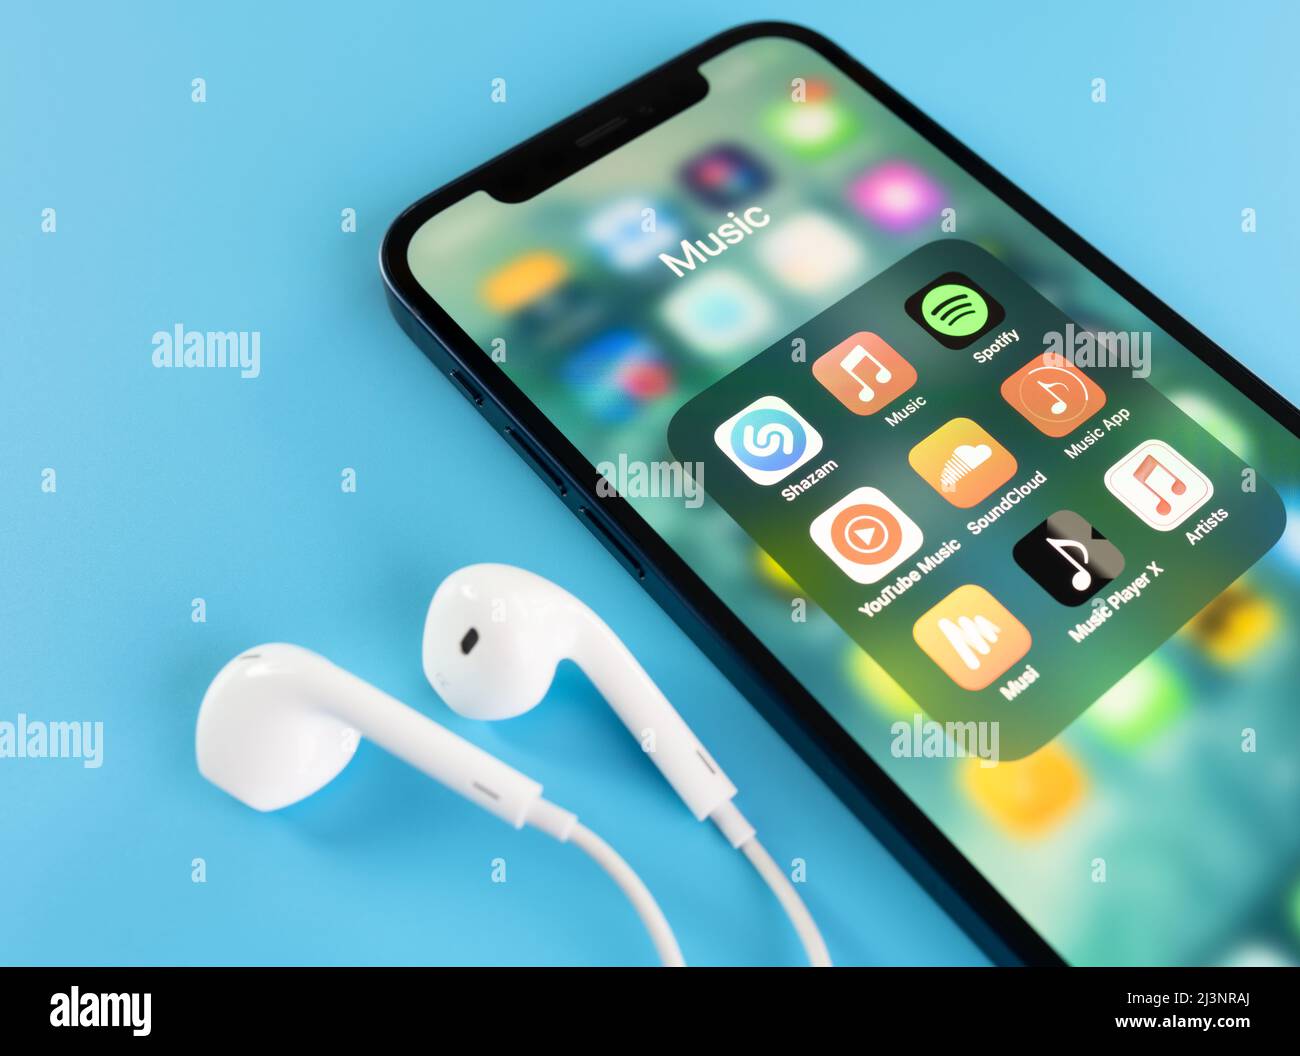 Music apps on an iPhone display - Apple Music, Spotify, YouTube Music, Musi, Shazam, Soundcloud, and other. Stock Photo